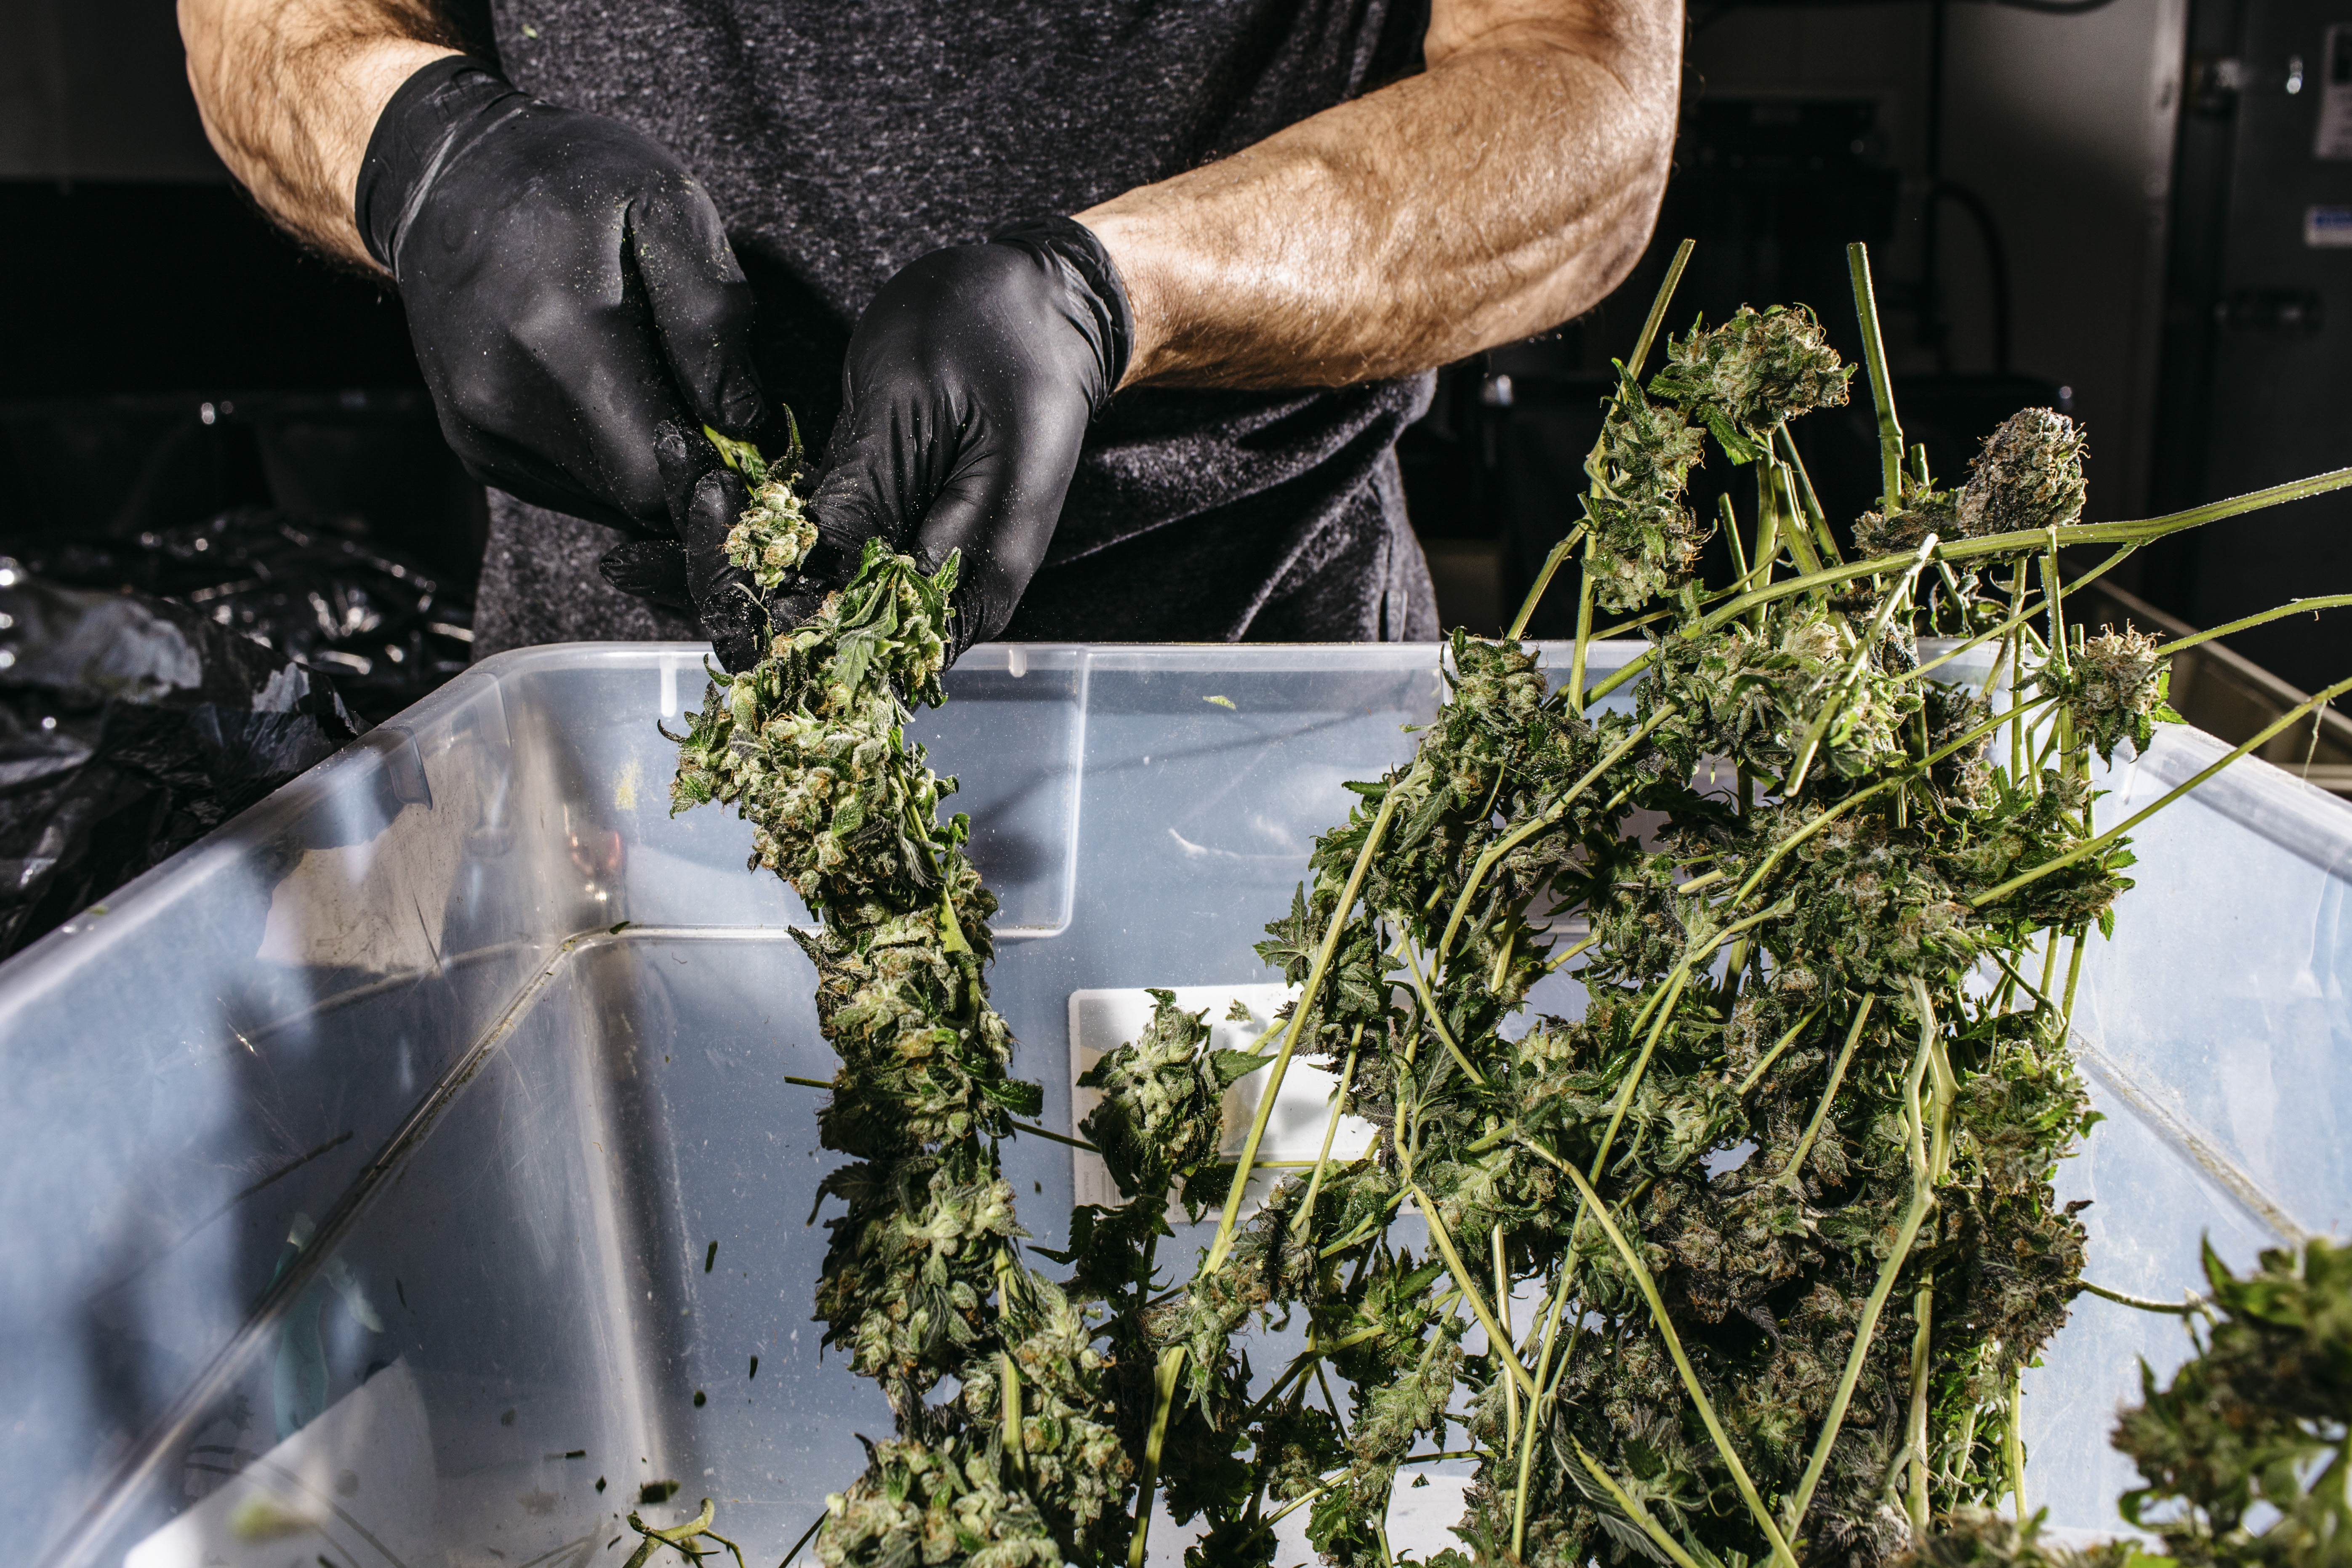 A person wearing black plastic gloves holds a marijuana plant.